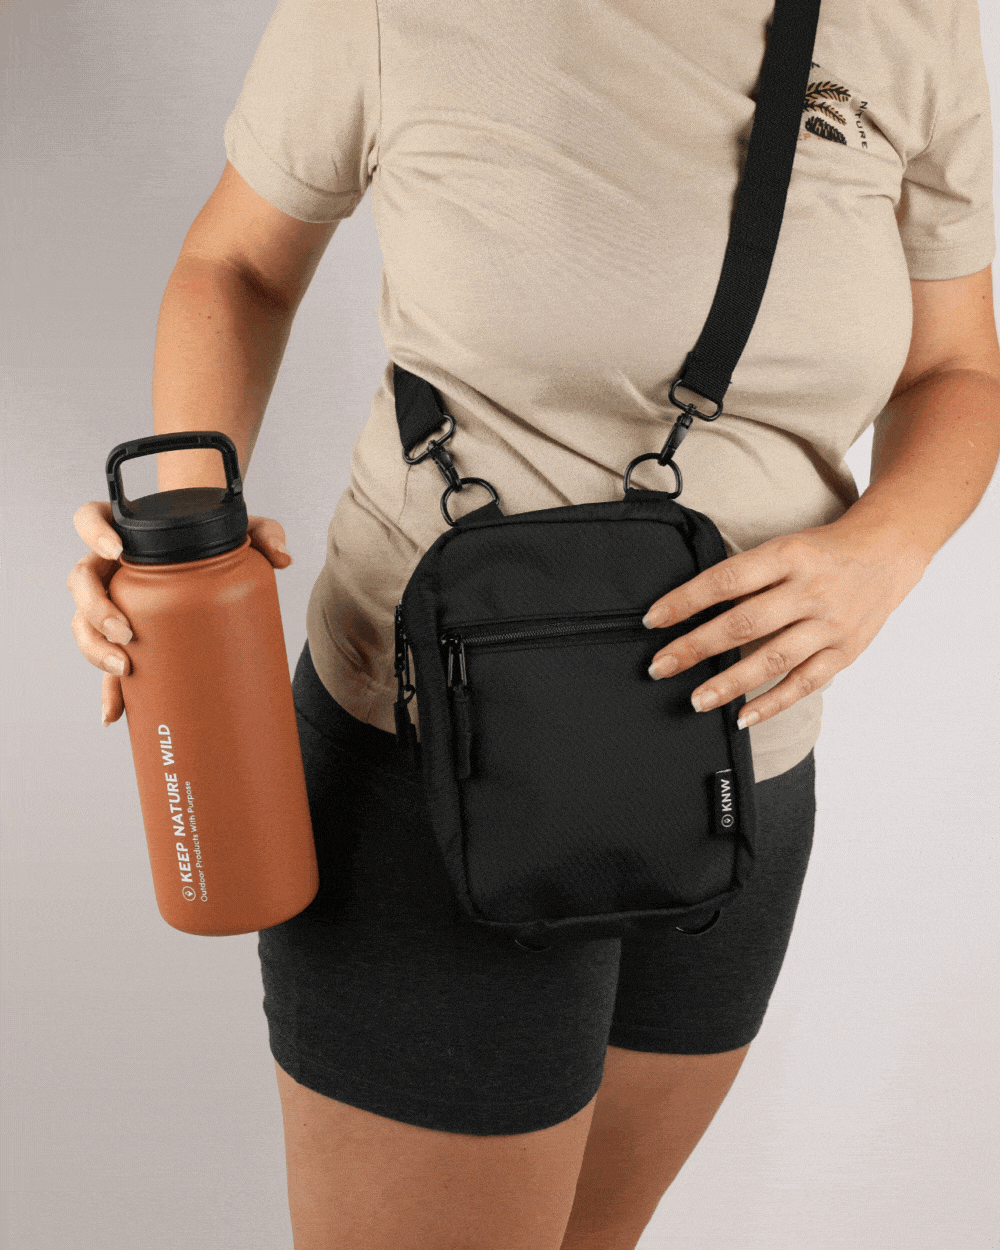 Keep Nature Wild Reusables Insulated 32oz Water Bottle with Handle Clip | Tucson Sun